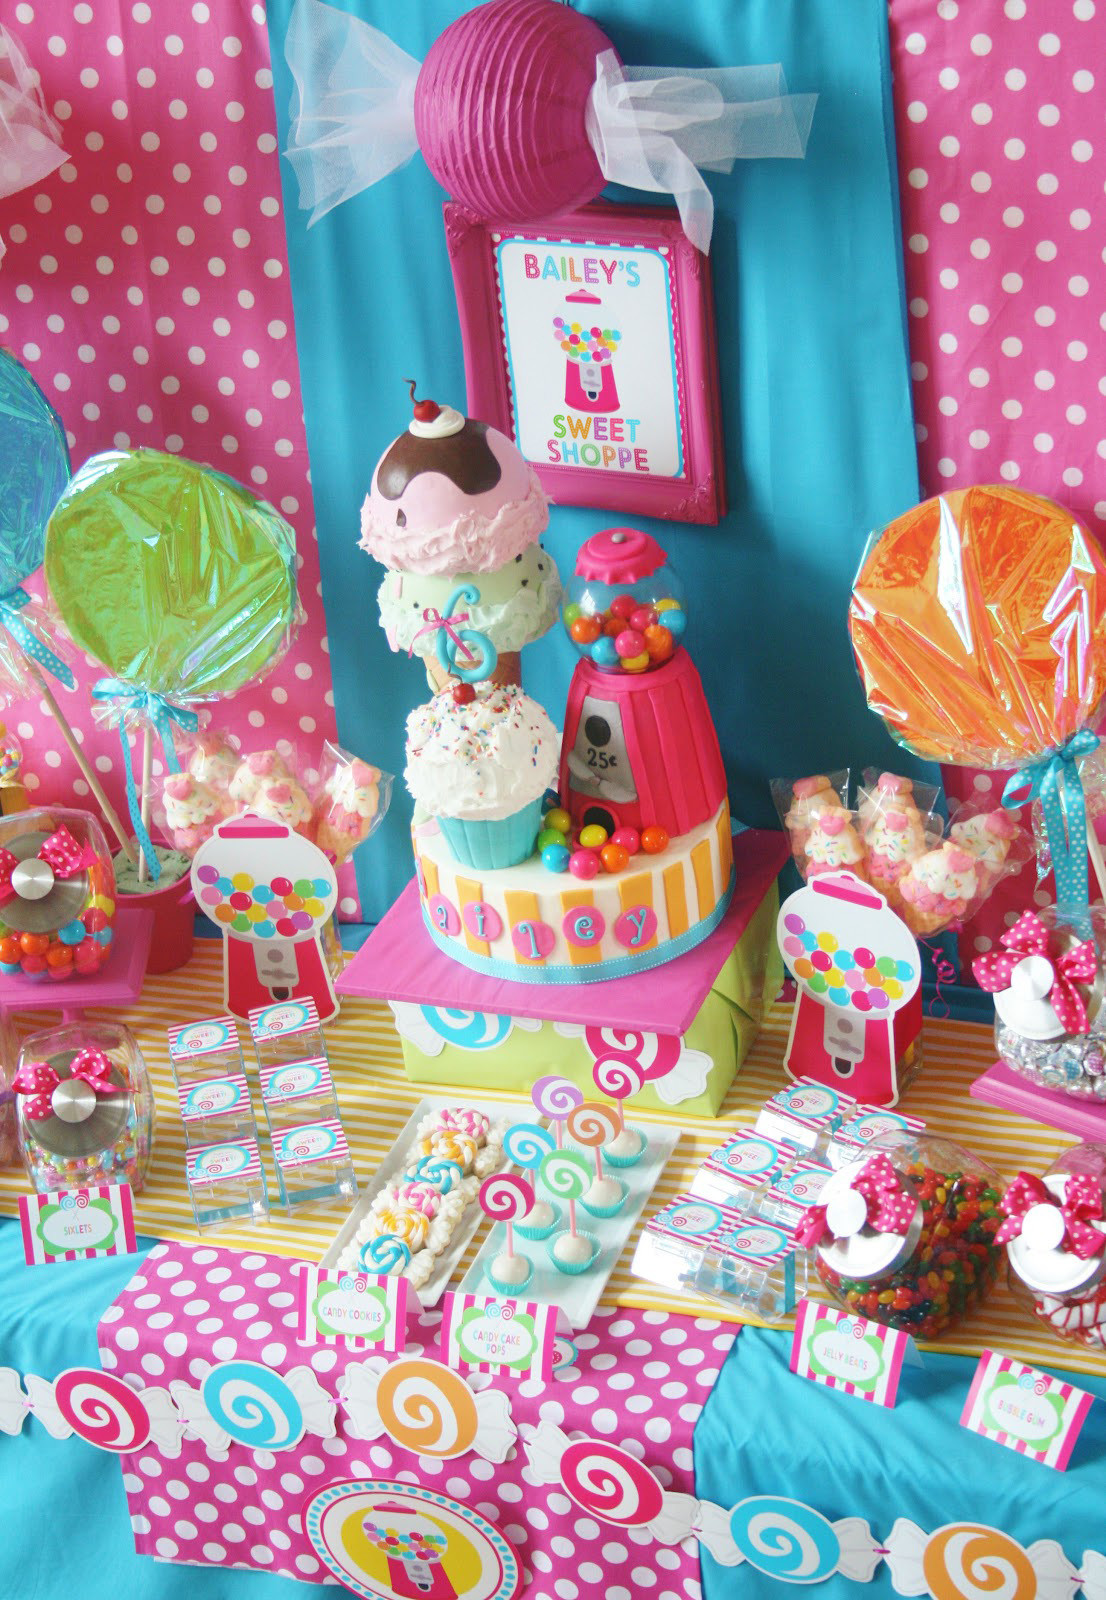 Candy Shoppe Birthday Party Ideas
 Amanda s Parties To Go Sweet Shoppe Party Candyland